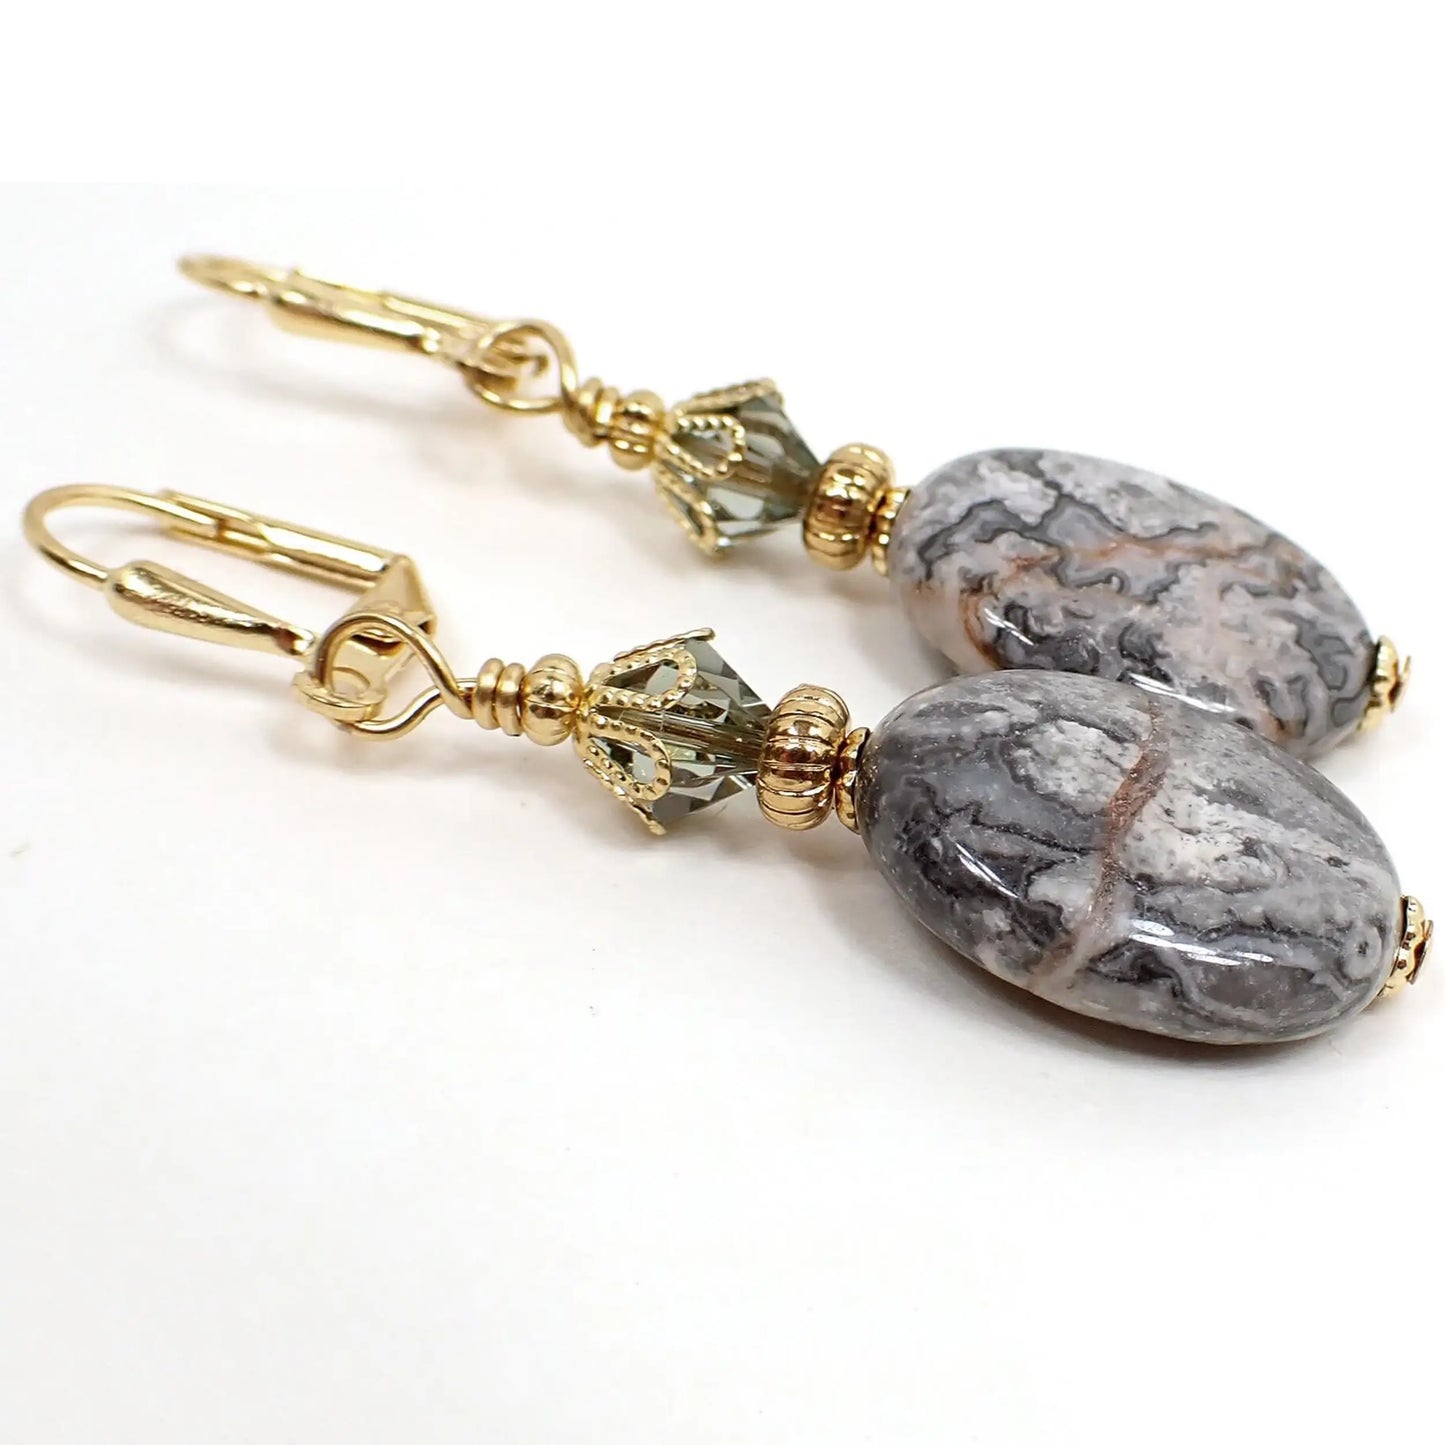 Angled view of the handmade crazy lace agate gemstone earrings. The metal is gold plated in color. There are faceted glass crystal beads at the top in a smoky greenish gray color. The bottom gemstone beads are oval shaped and have mostly marbled gray colors with a few red lines through them here and there.